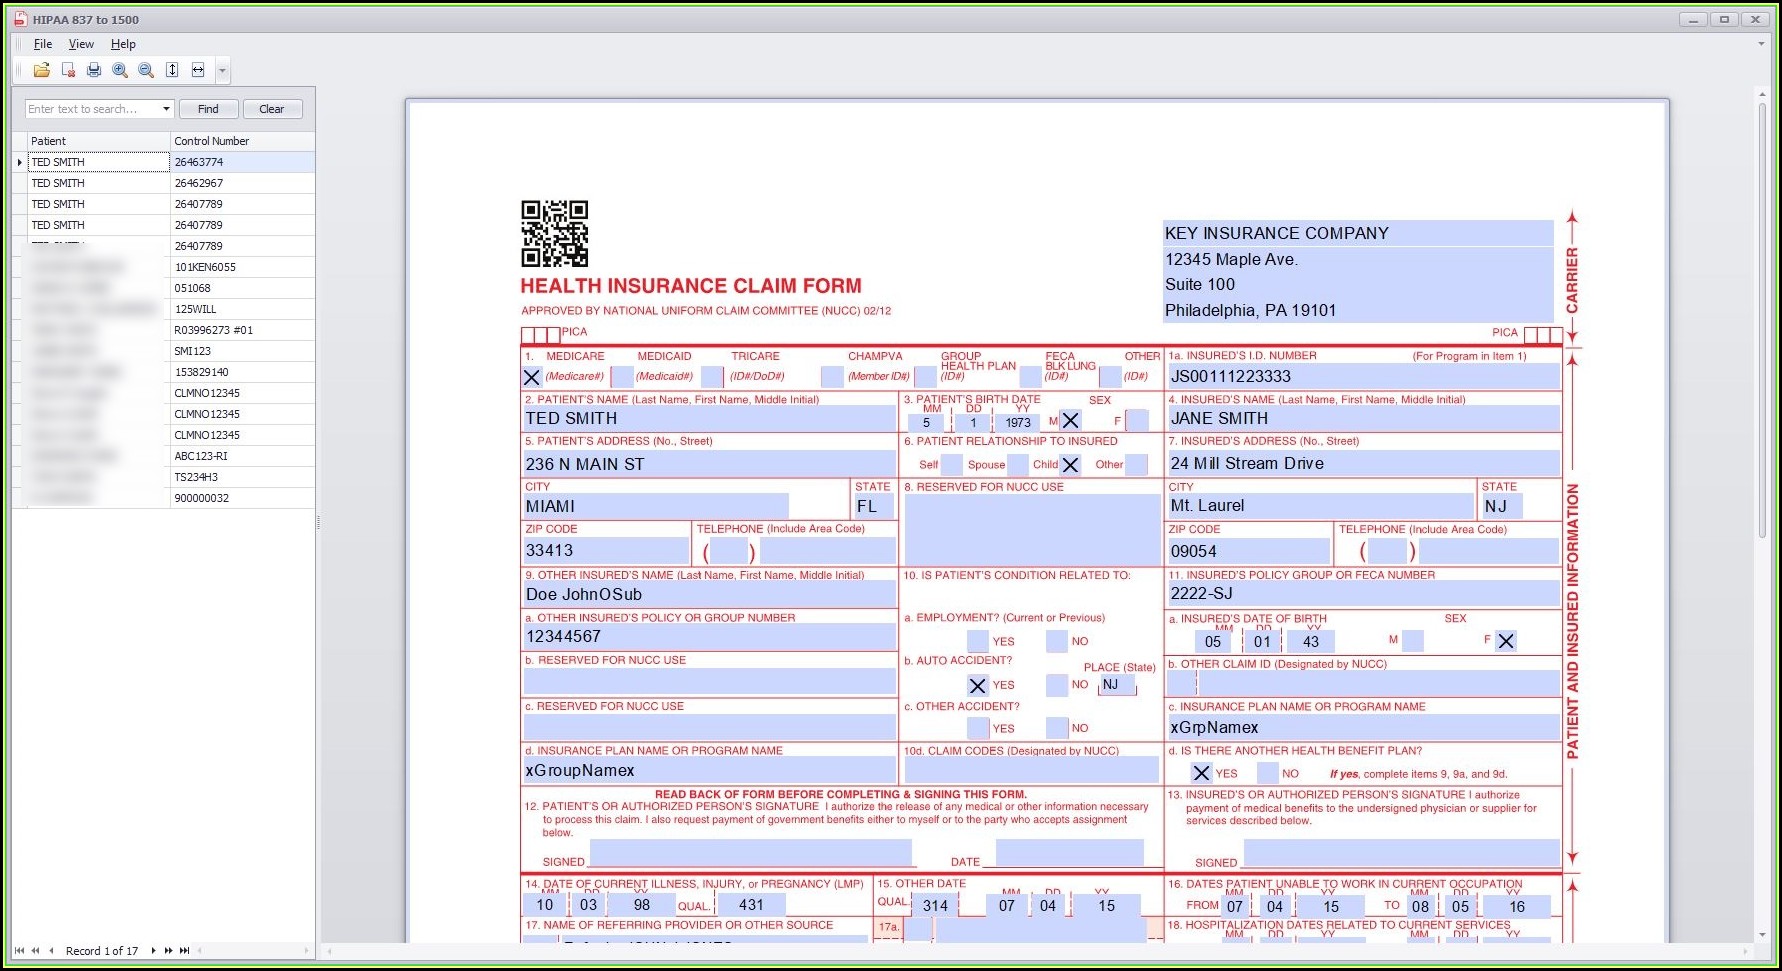 Completed Cms 1500 Claim Form Sample